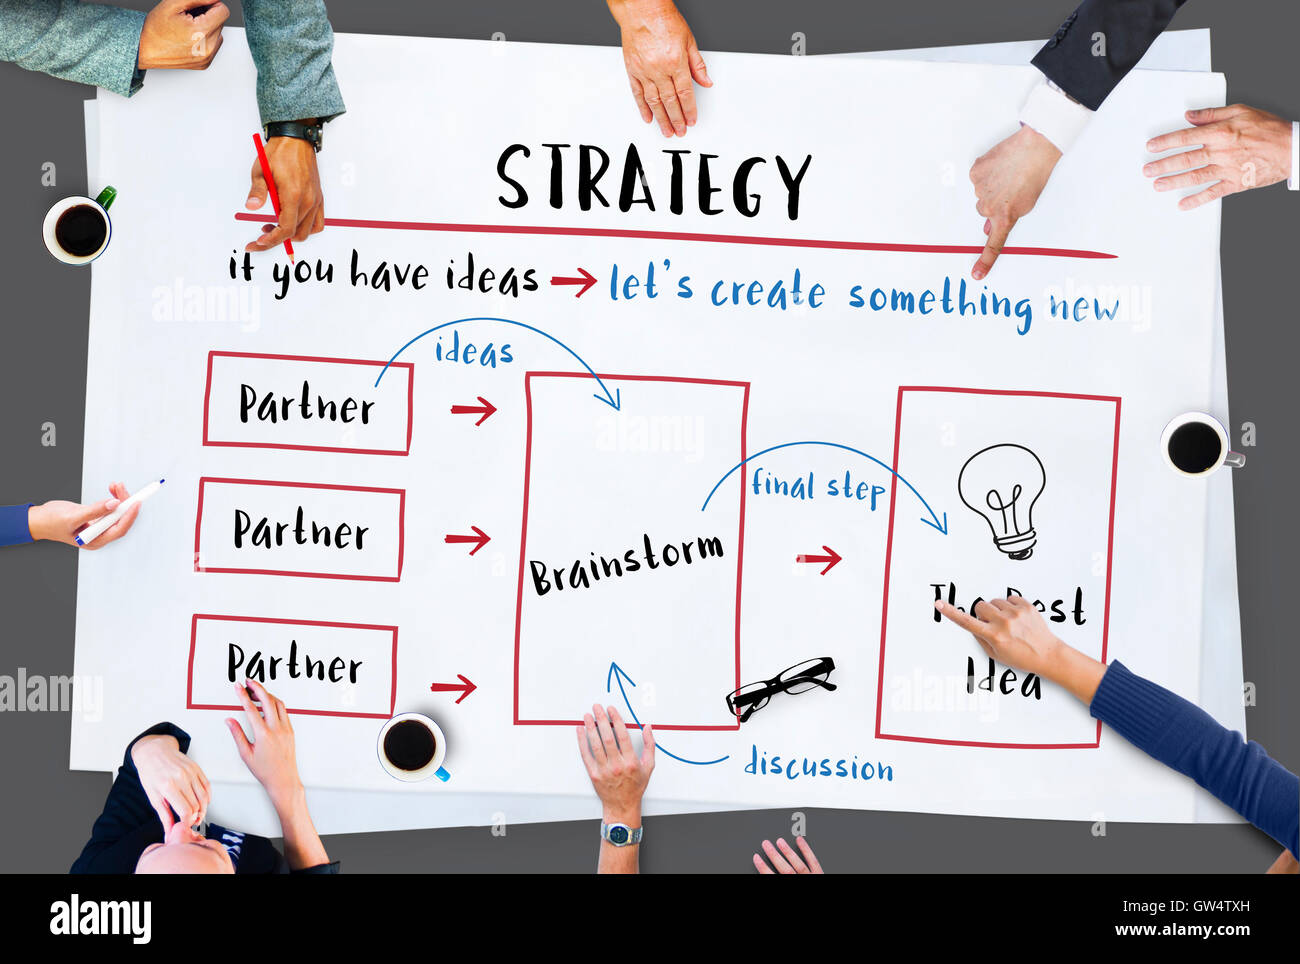 Strategy Business Plan Diagram Concept Stock Photo